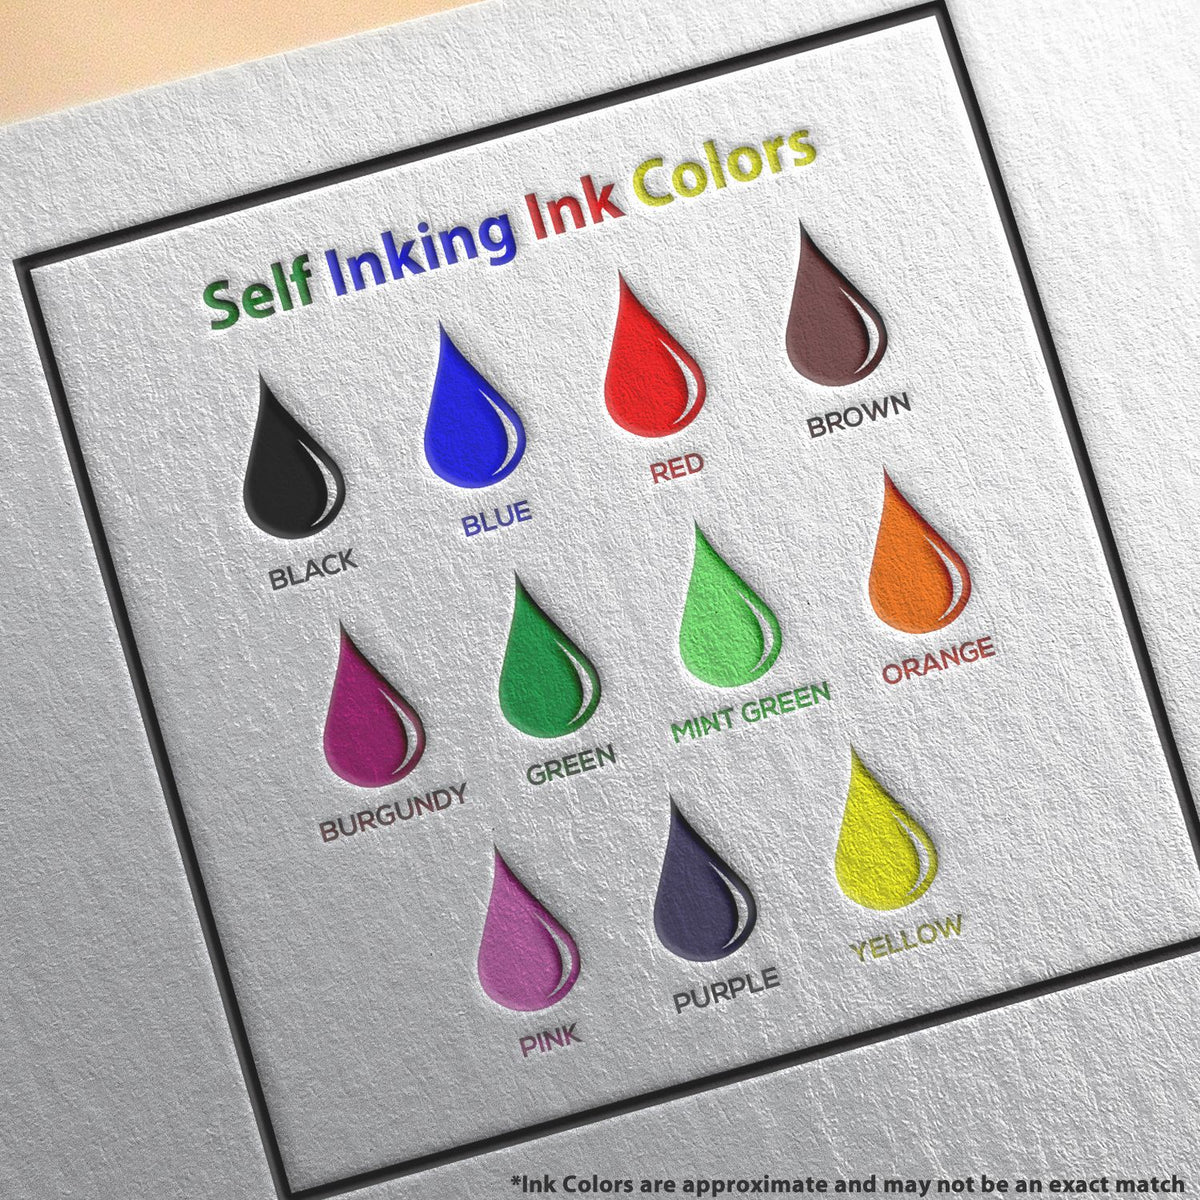 A picture showing the different ink colors or hues available for the Self-Inking Utah Landscape Architect Stamp product.